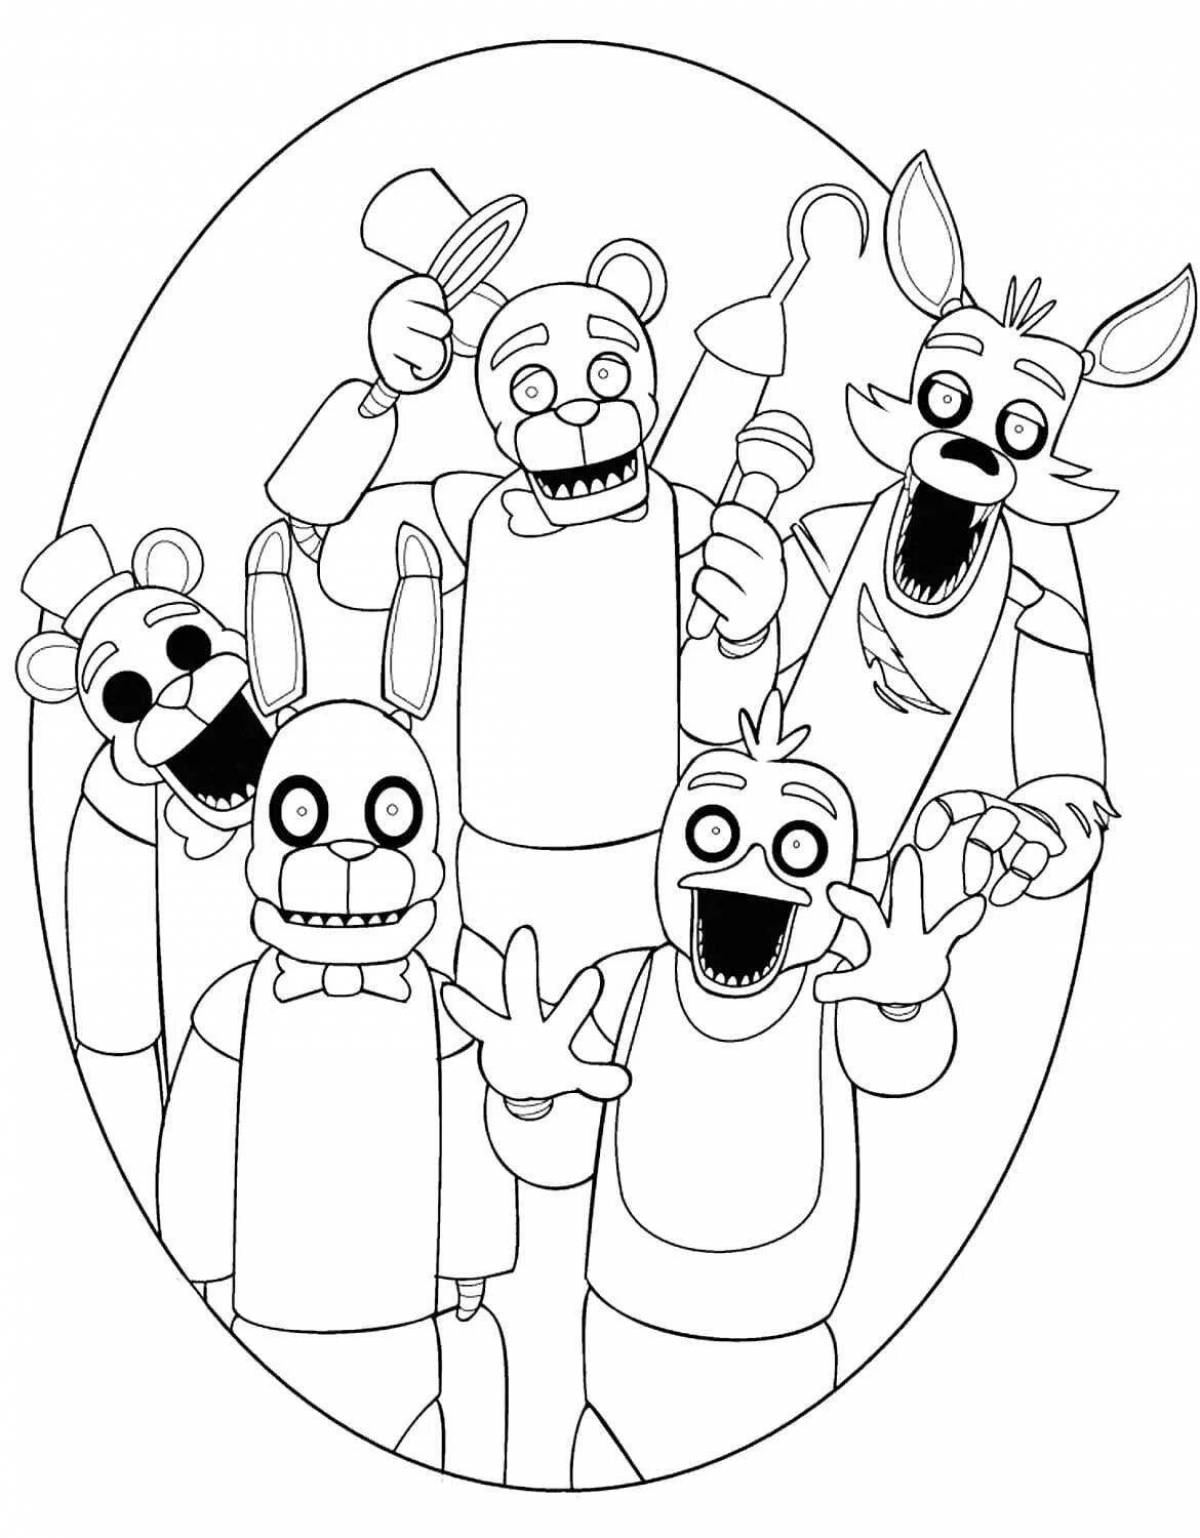 Alive freddy and chica coloring book